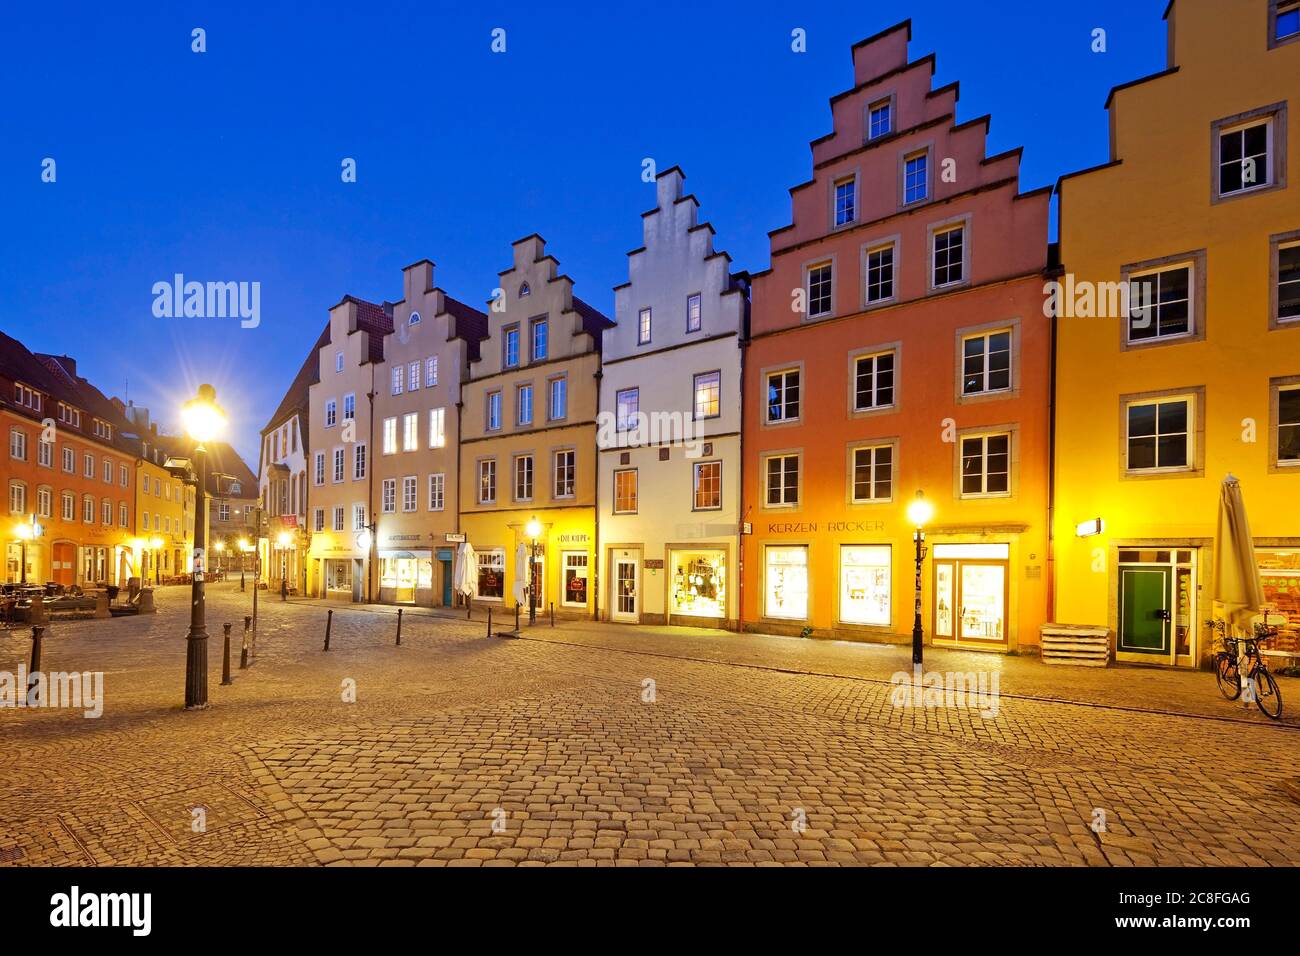 market square with gabled houses in the evening, Germany, Lower Saxony, Osnabrueck Stock Photo